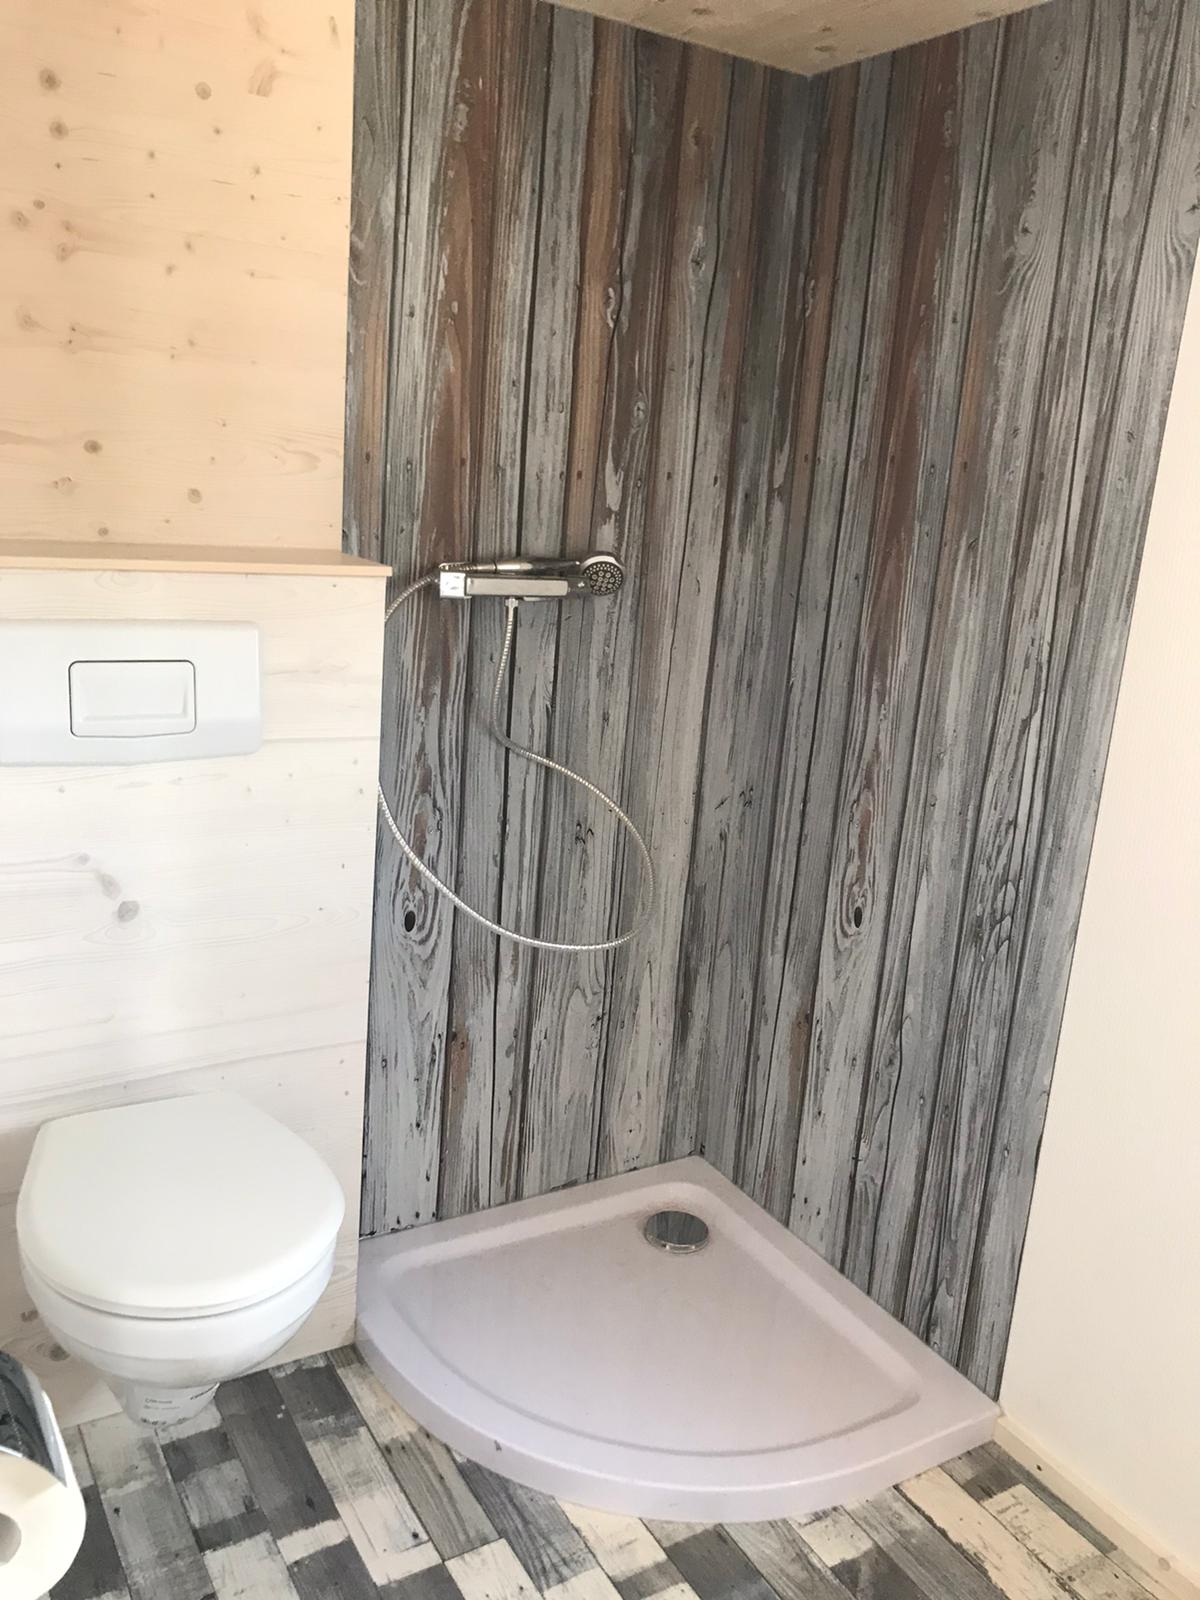 A shower in a tiny house